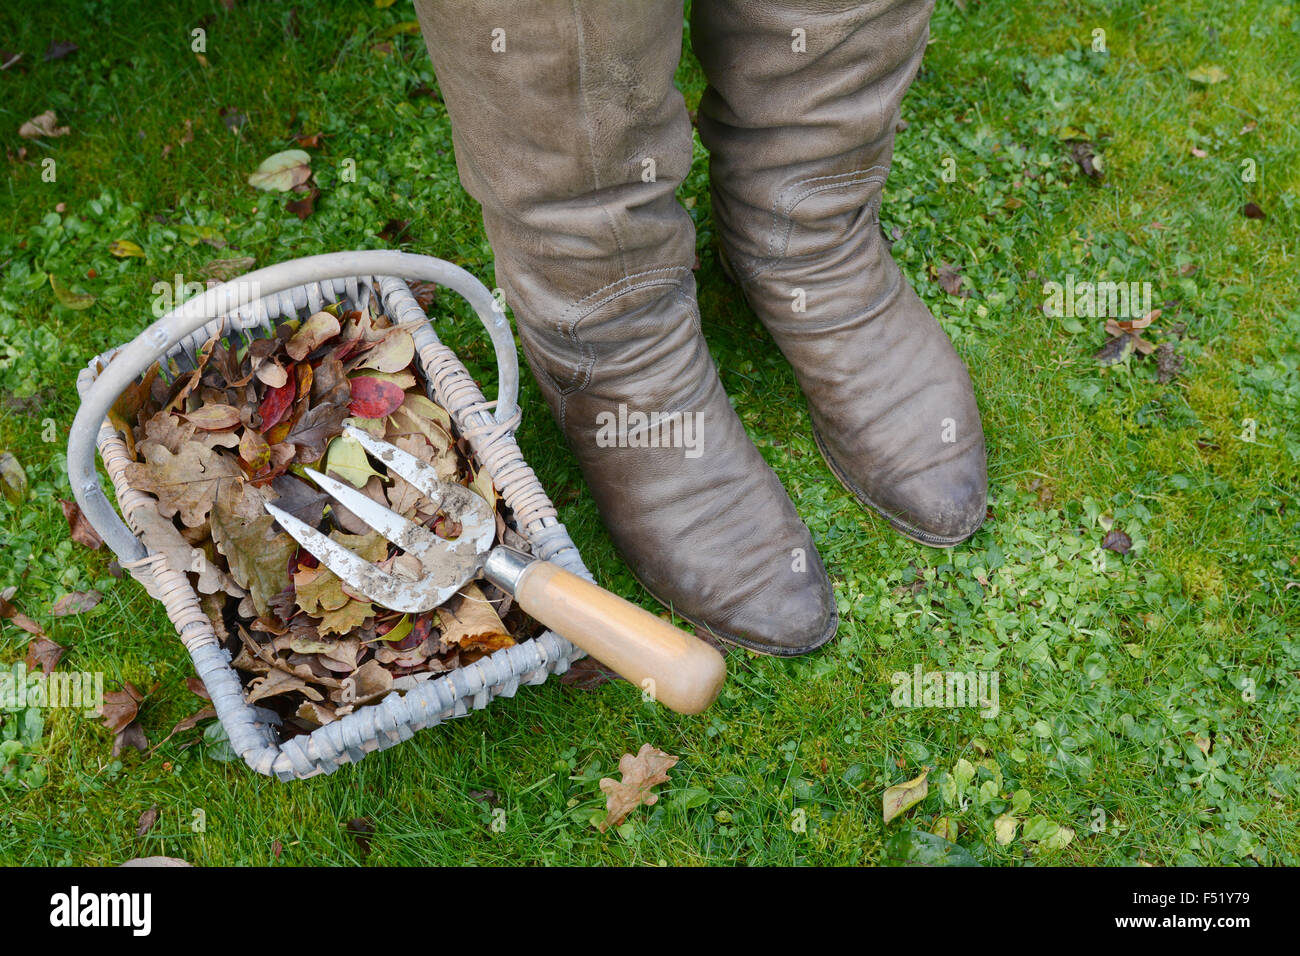 Closeup of woman's winter boots next to a basket of autumn leaves with a dirty garden hand fork Stock Photo